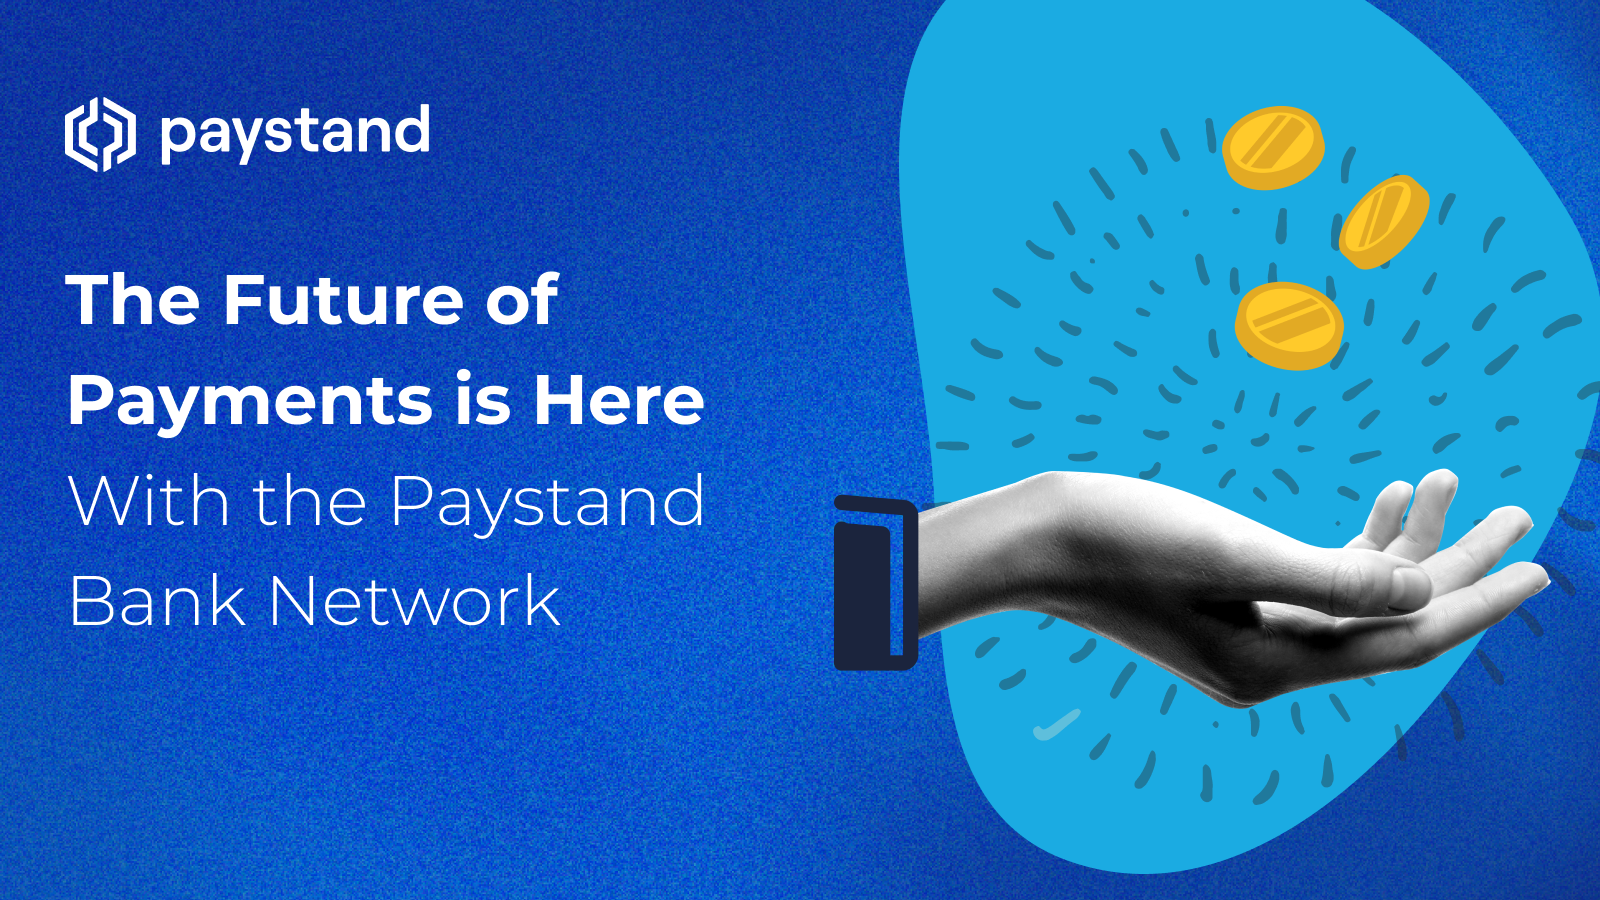 The Future of Payments is Here With the Paystand Bank Network